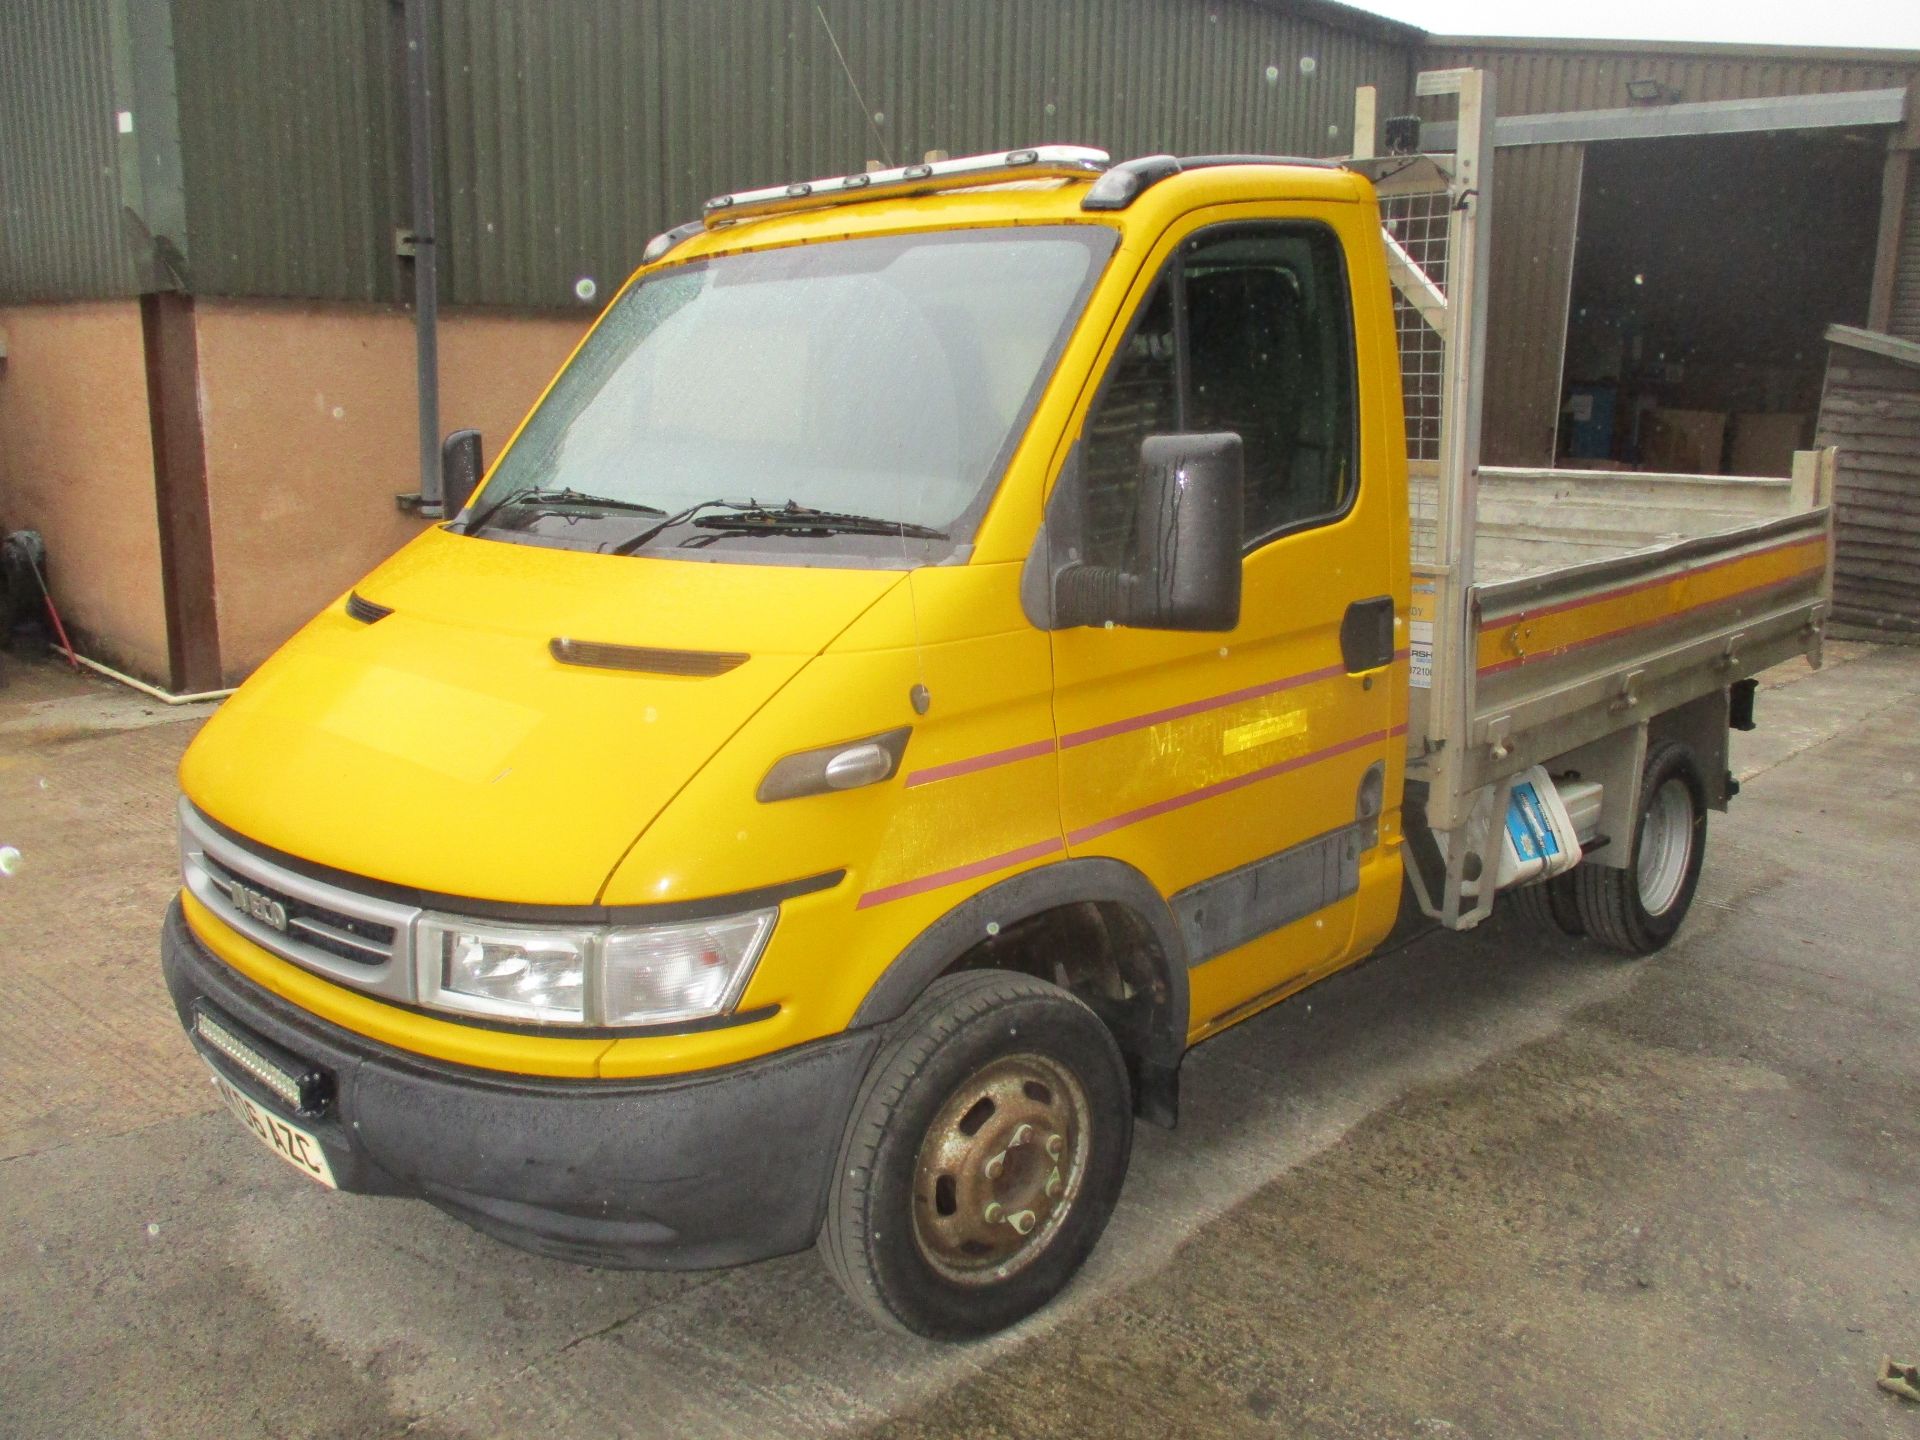 06/06 IVECO DAILY 35C12 SWD - 2300cc 2.dr Tipper (Yellow, 86k) - Image 2 of 5